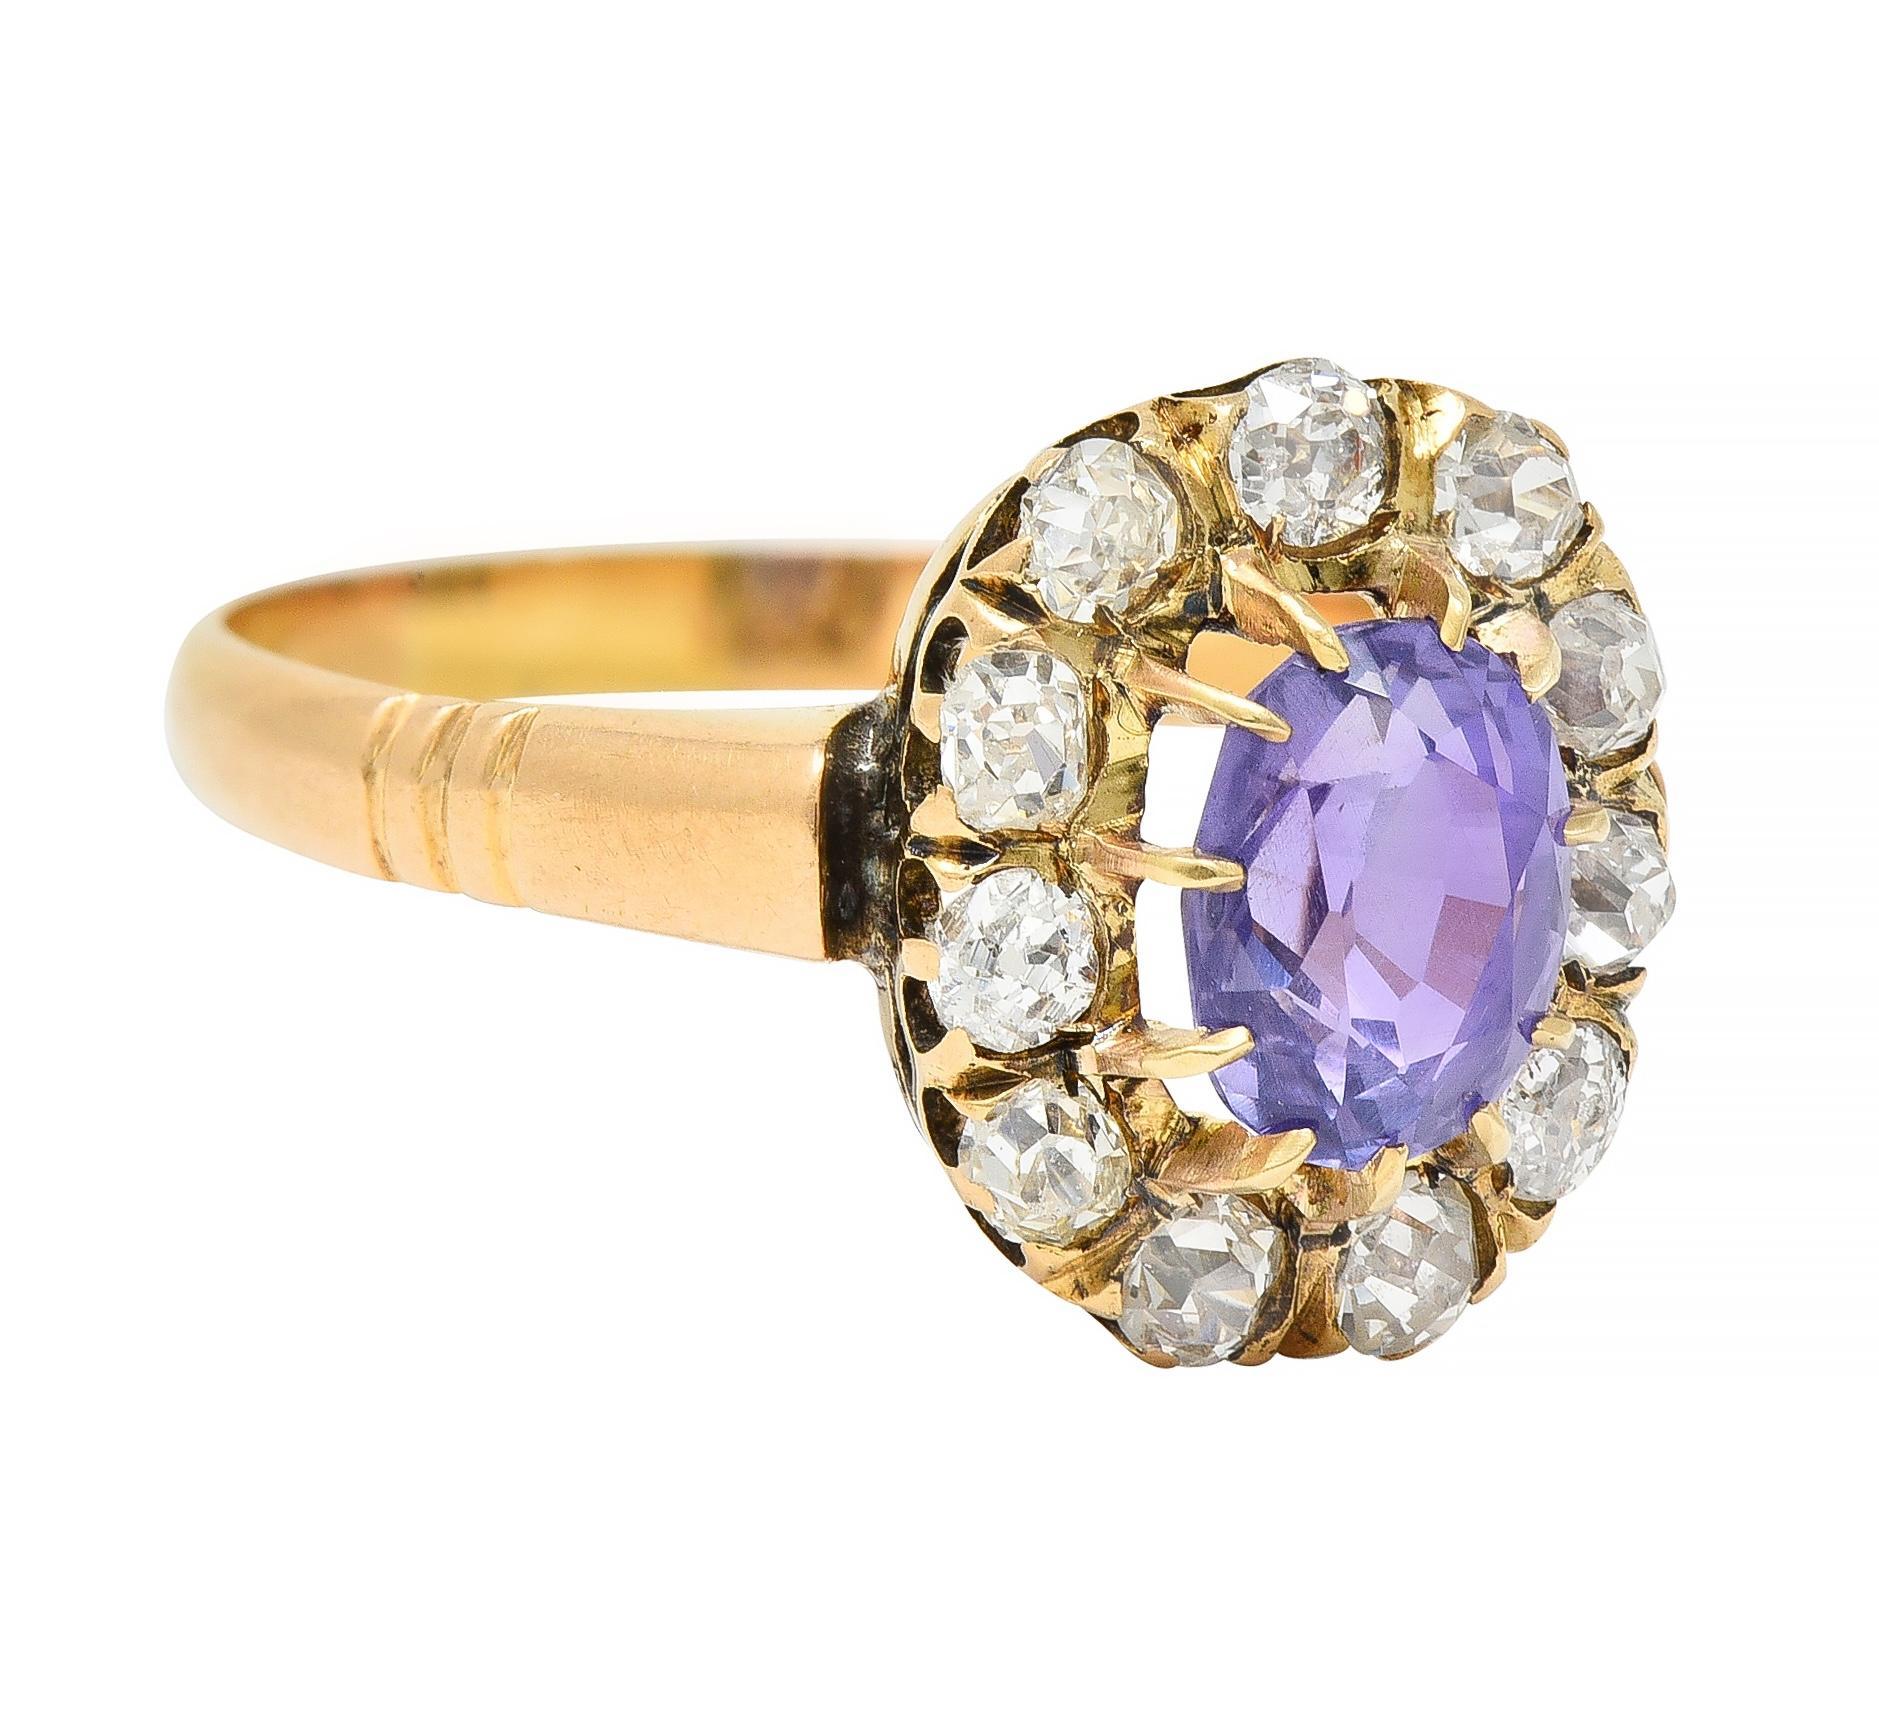 Centering an oval cut sapphire weighing 1.12 carats - transparent light purple in color 
Natural Sri Lankan in origin with no indications of heat treatment 
Prong set with a recessed halo surround of old mine cut diamonds
Weighing approximately 0.66